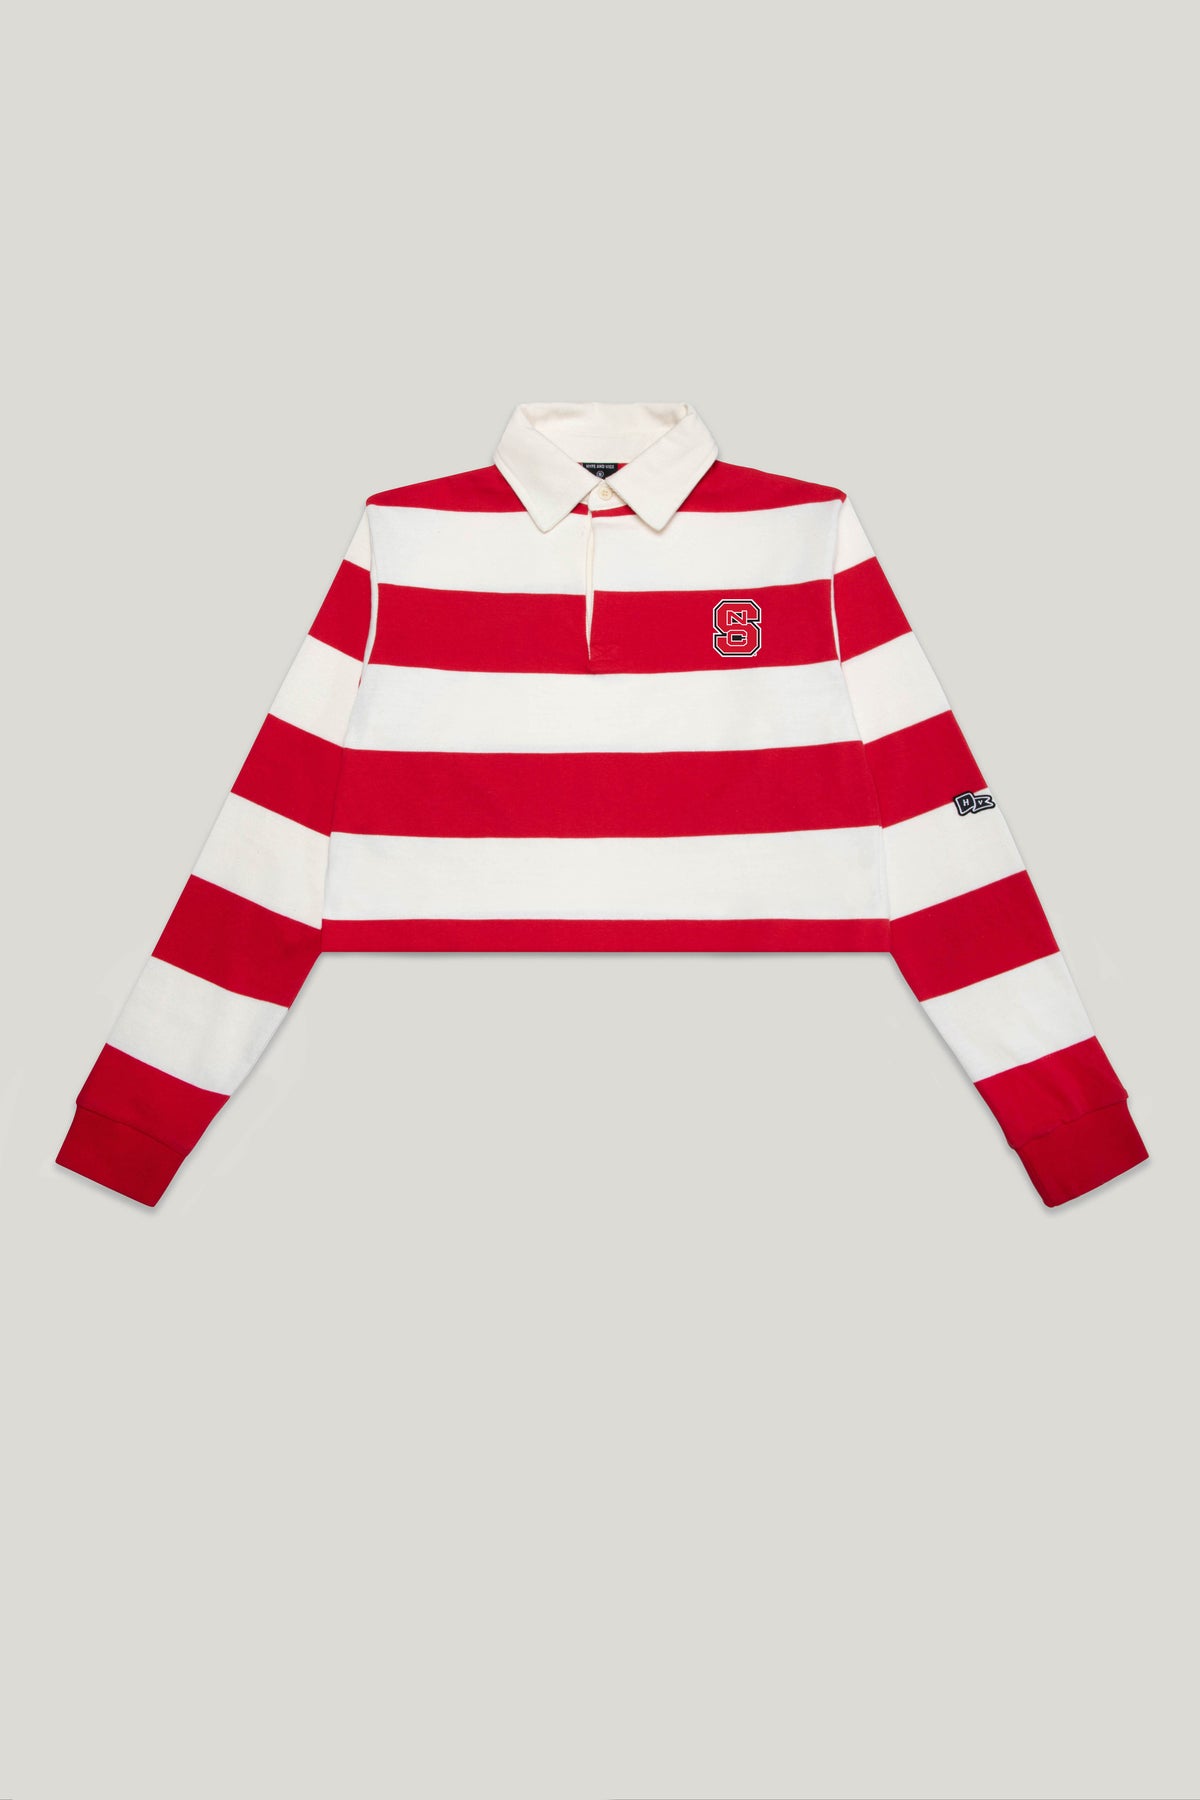 NC State Rugby Top